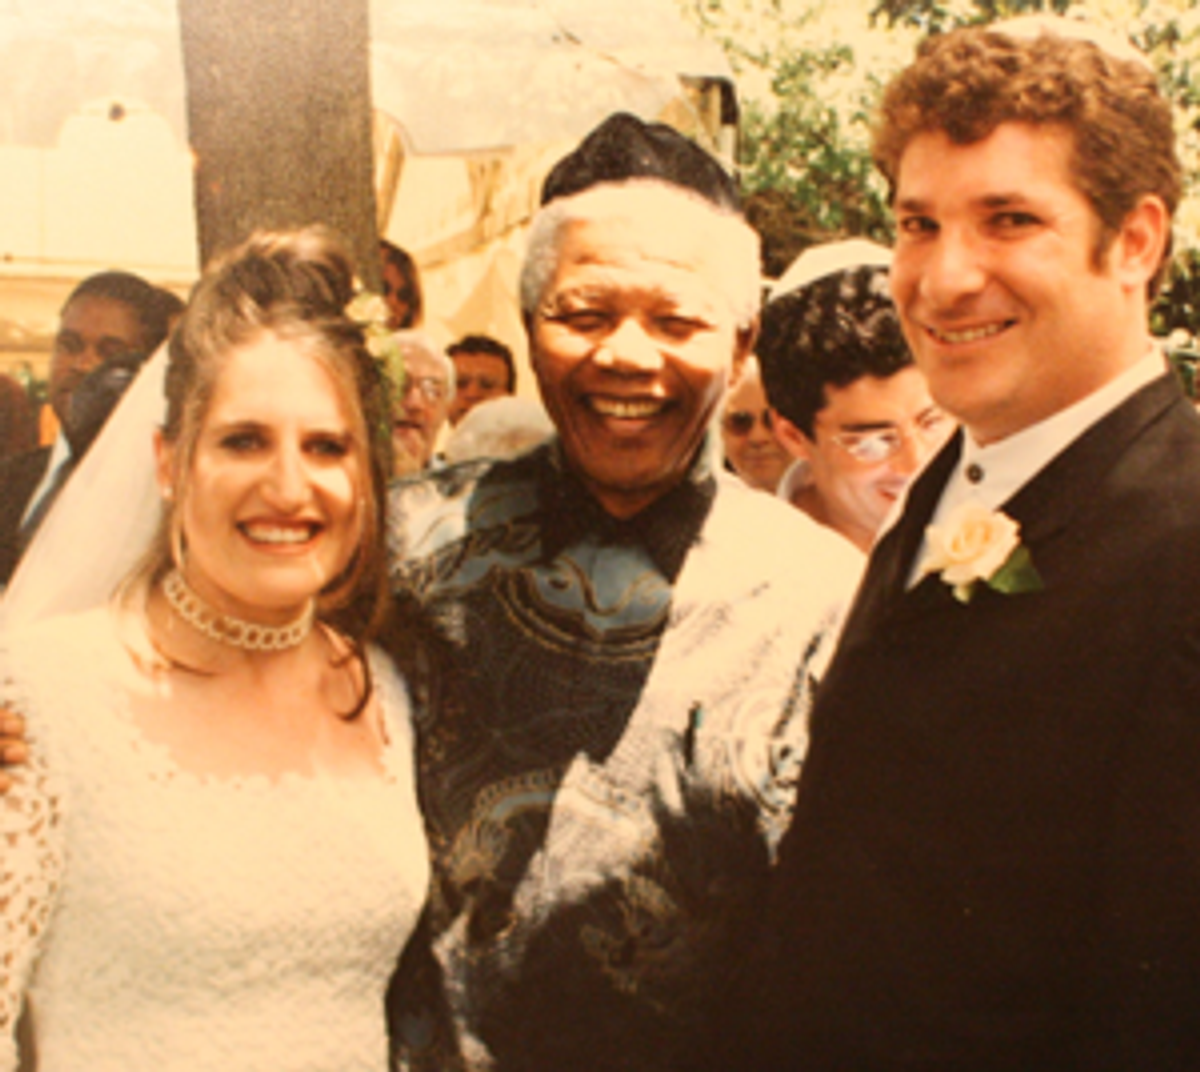 Jerome and Jacky Chaskalson at their wedding, pictured with Nelson Mandela. (Courtesy of Jerome Chaskalson)